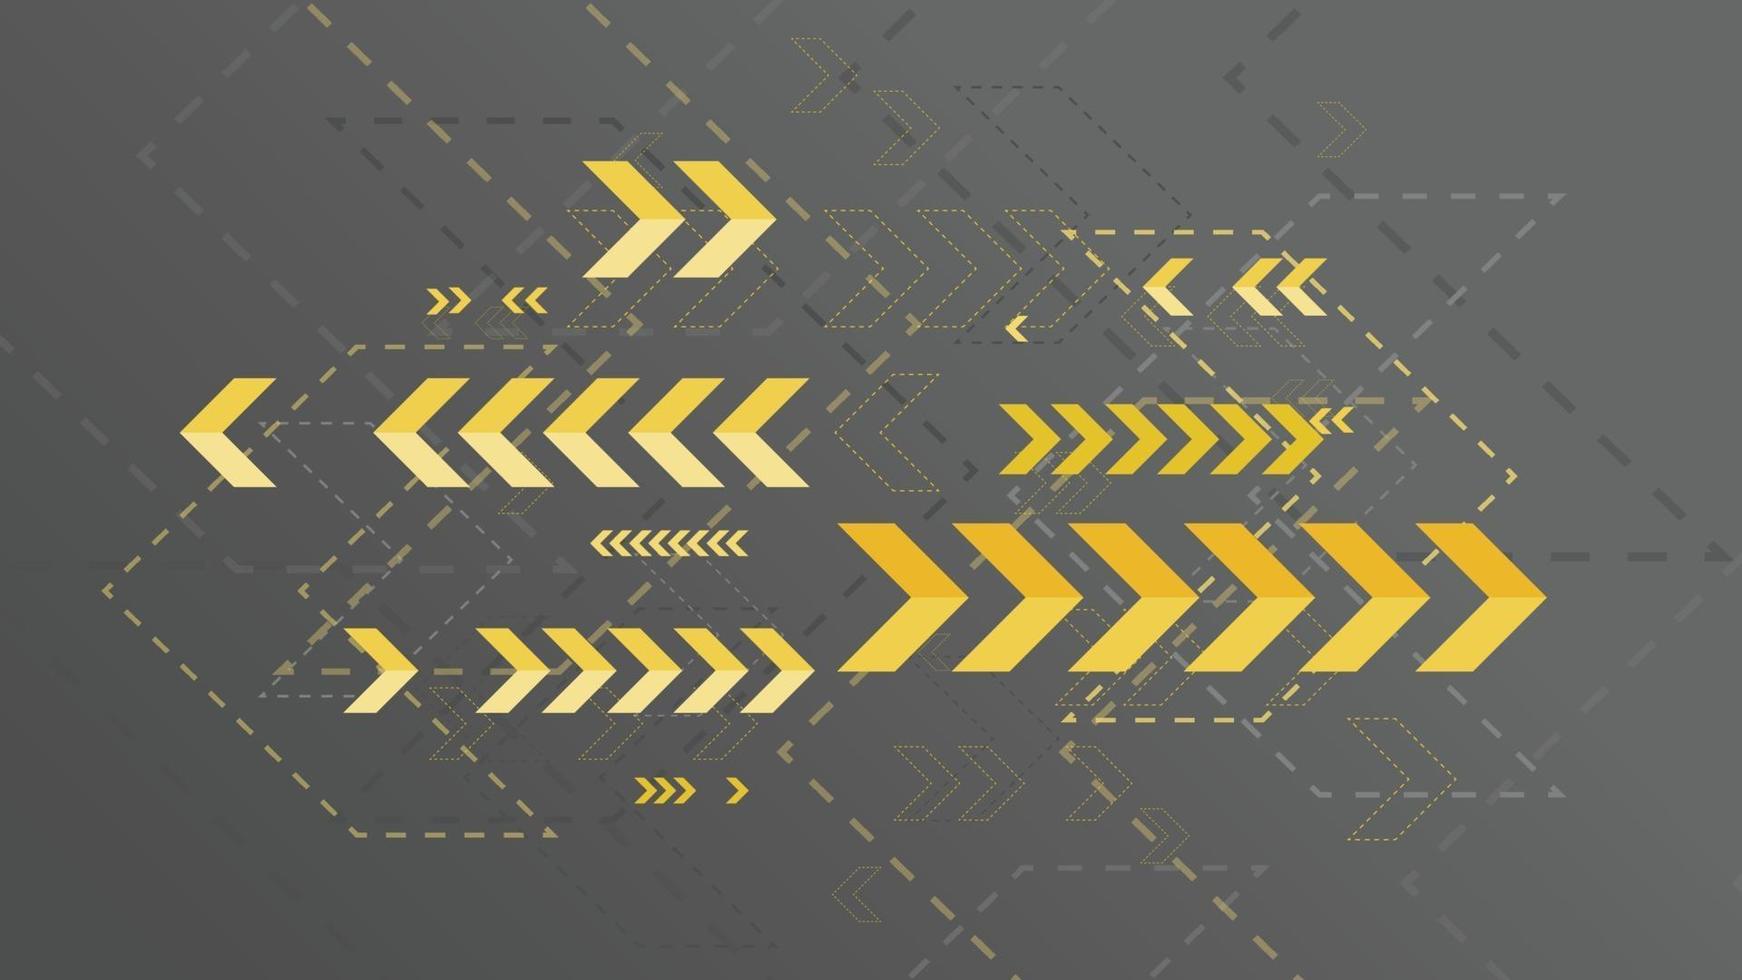 Abstract yellow arrows sign on dark background vector